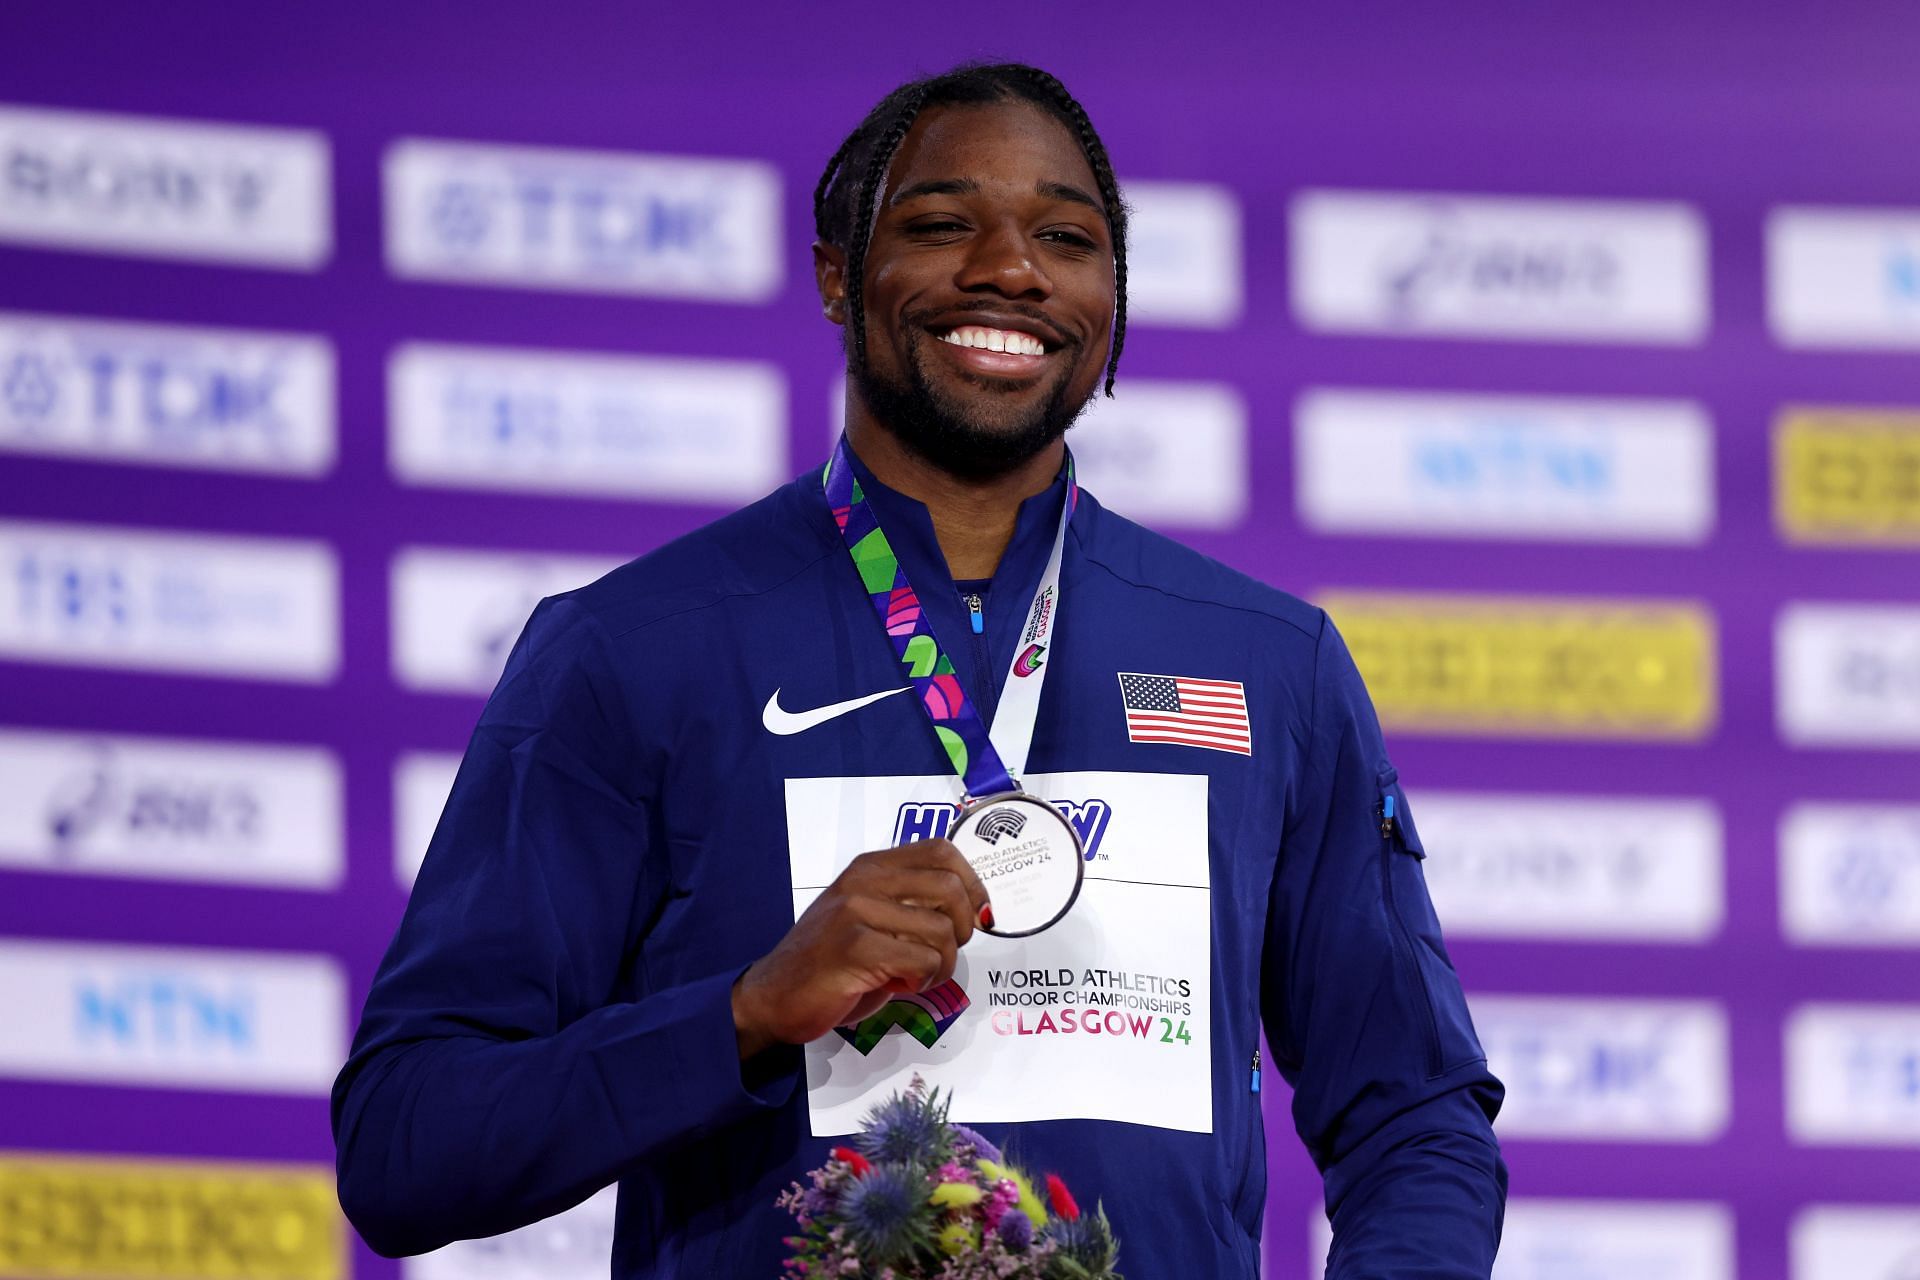 "USA vs World" Noah Lyles previews a highly anticipated clash at the